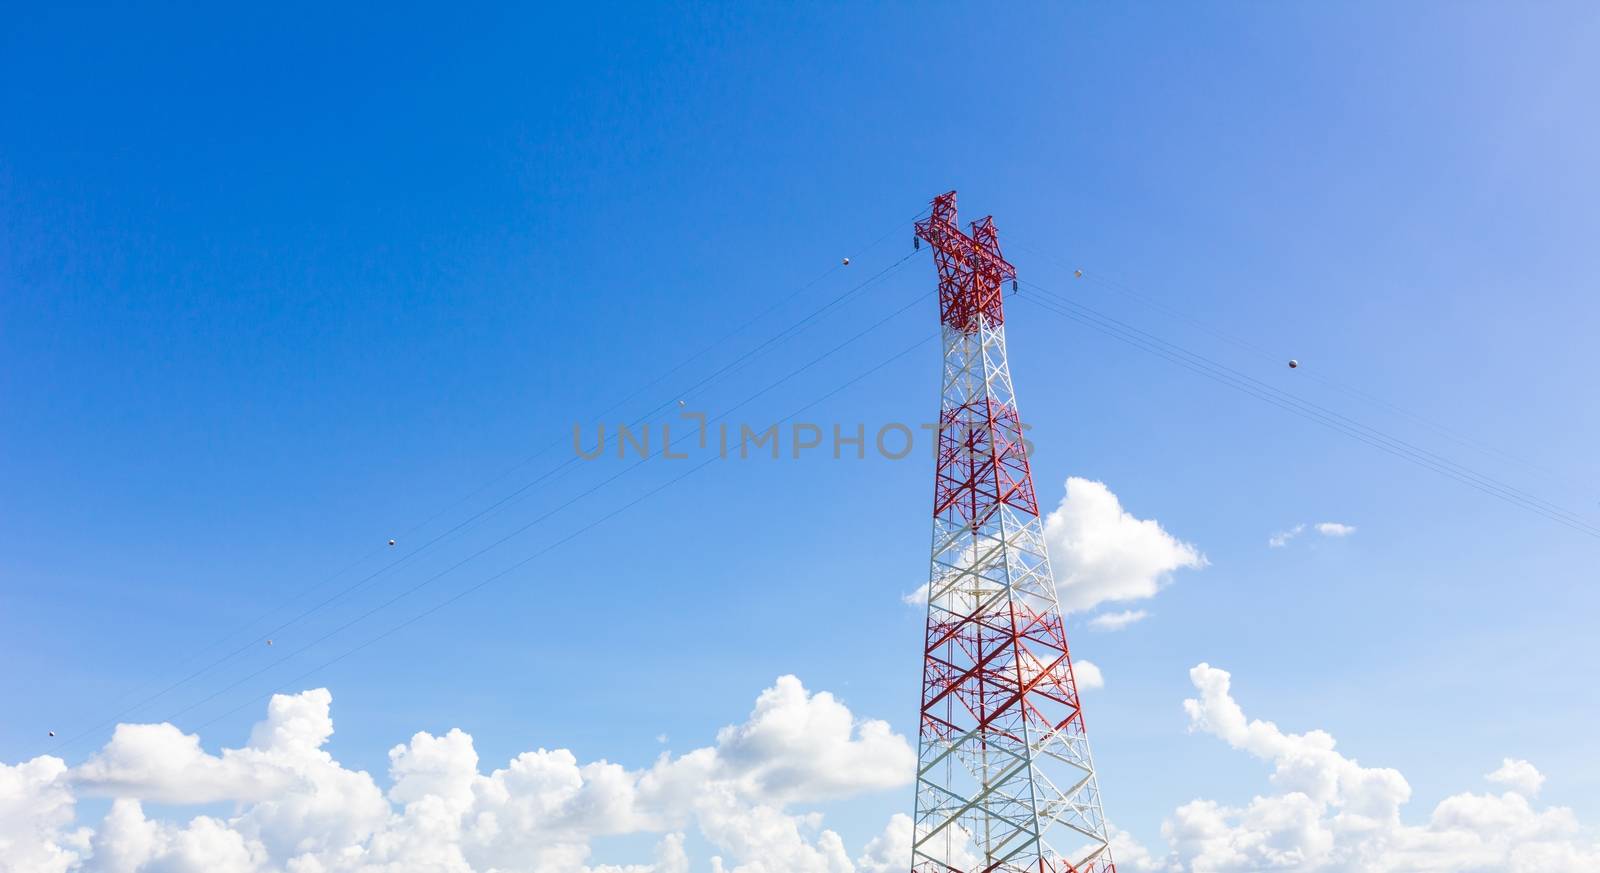 Telecommunication mast with microwave link and TV transmitter antennas on blue sky